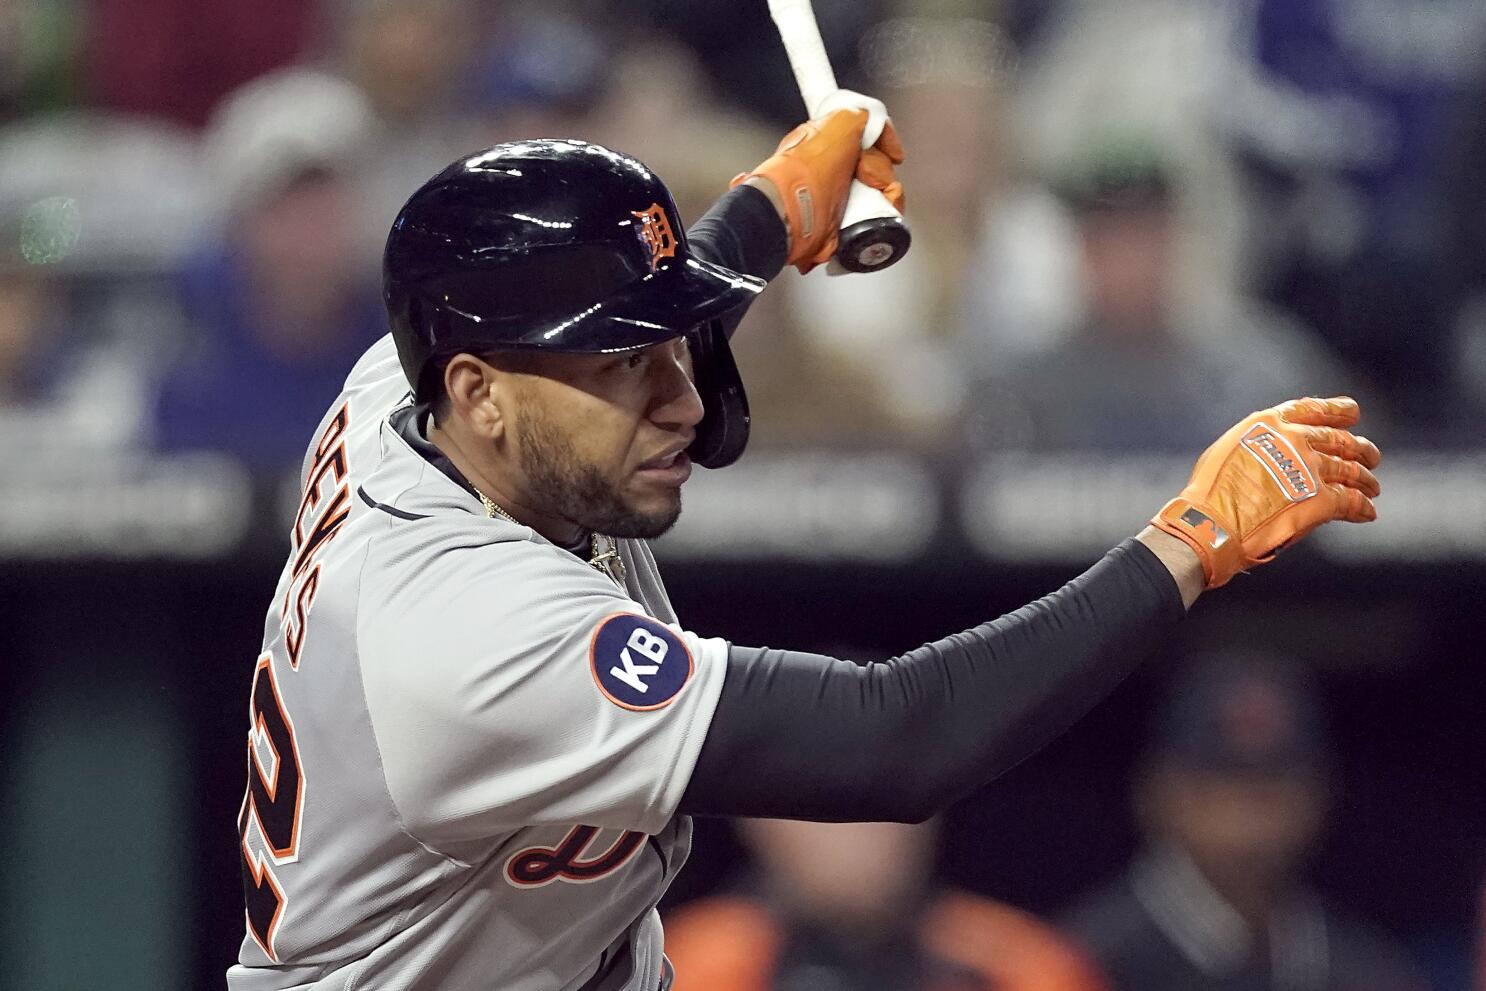 Reyes, Meadows drive in runs in 7th, Tigers beat Royals 4-2 - The